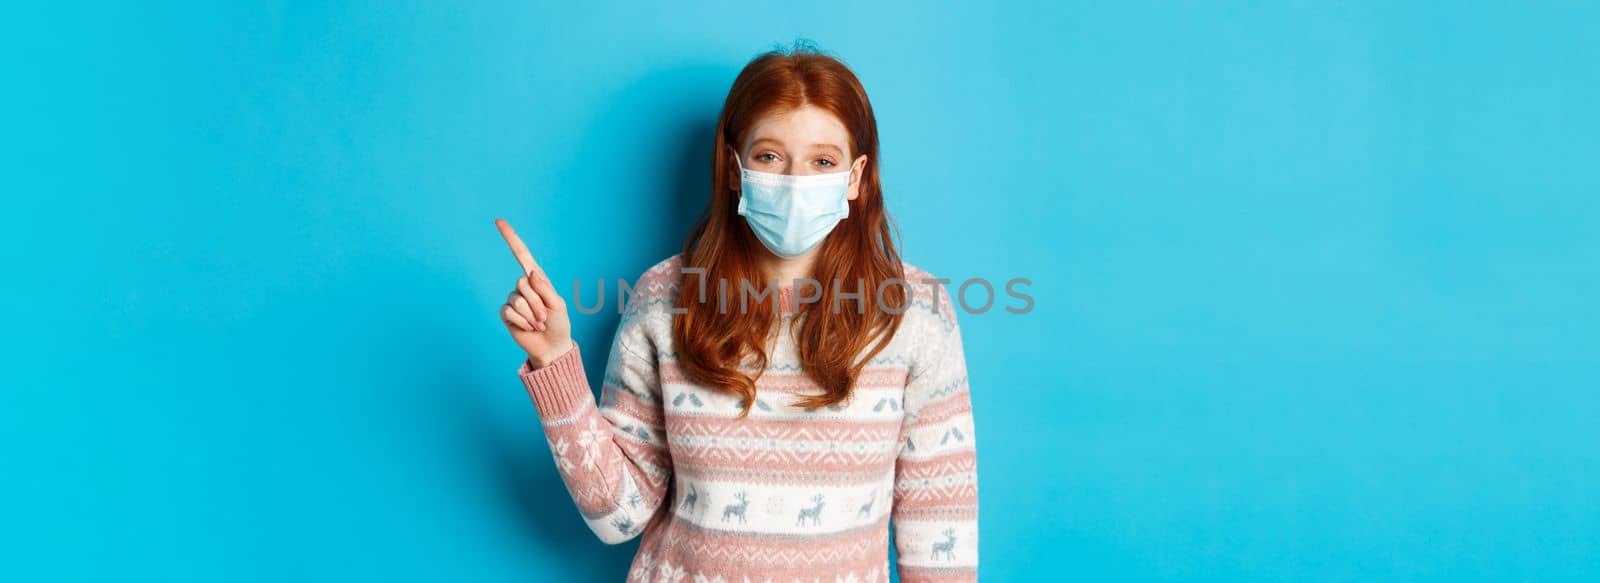 Winter, coronavirus and social distancing concept. Redhead girl in medical mask and sweater pointing at upper right corner and laughing, standing over blue background.